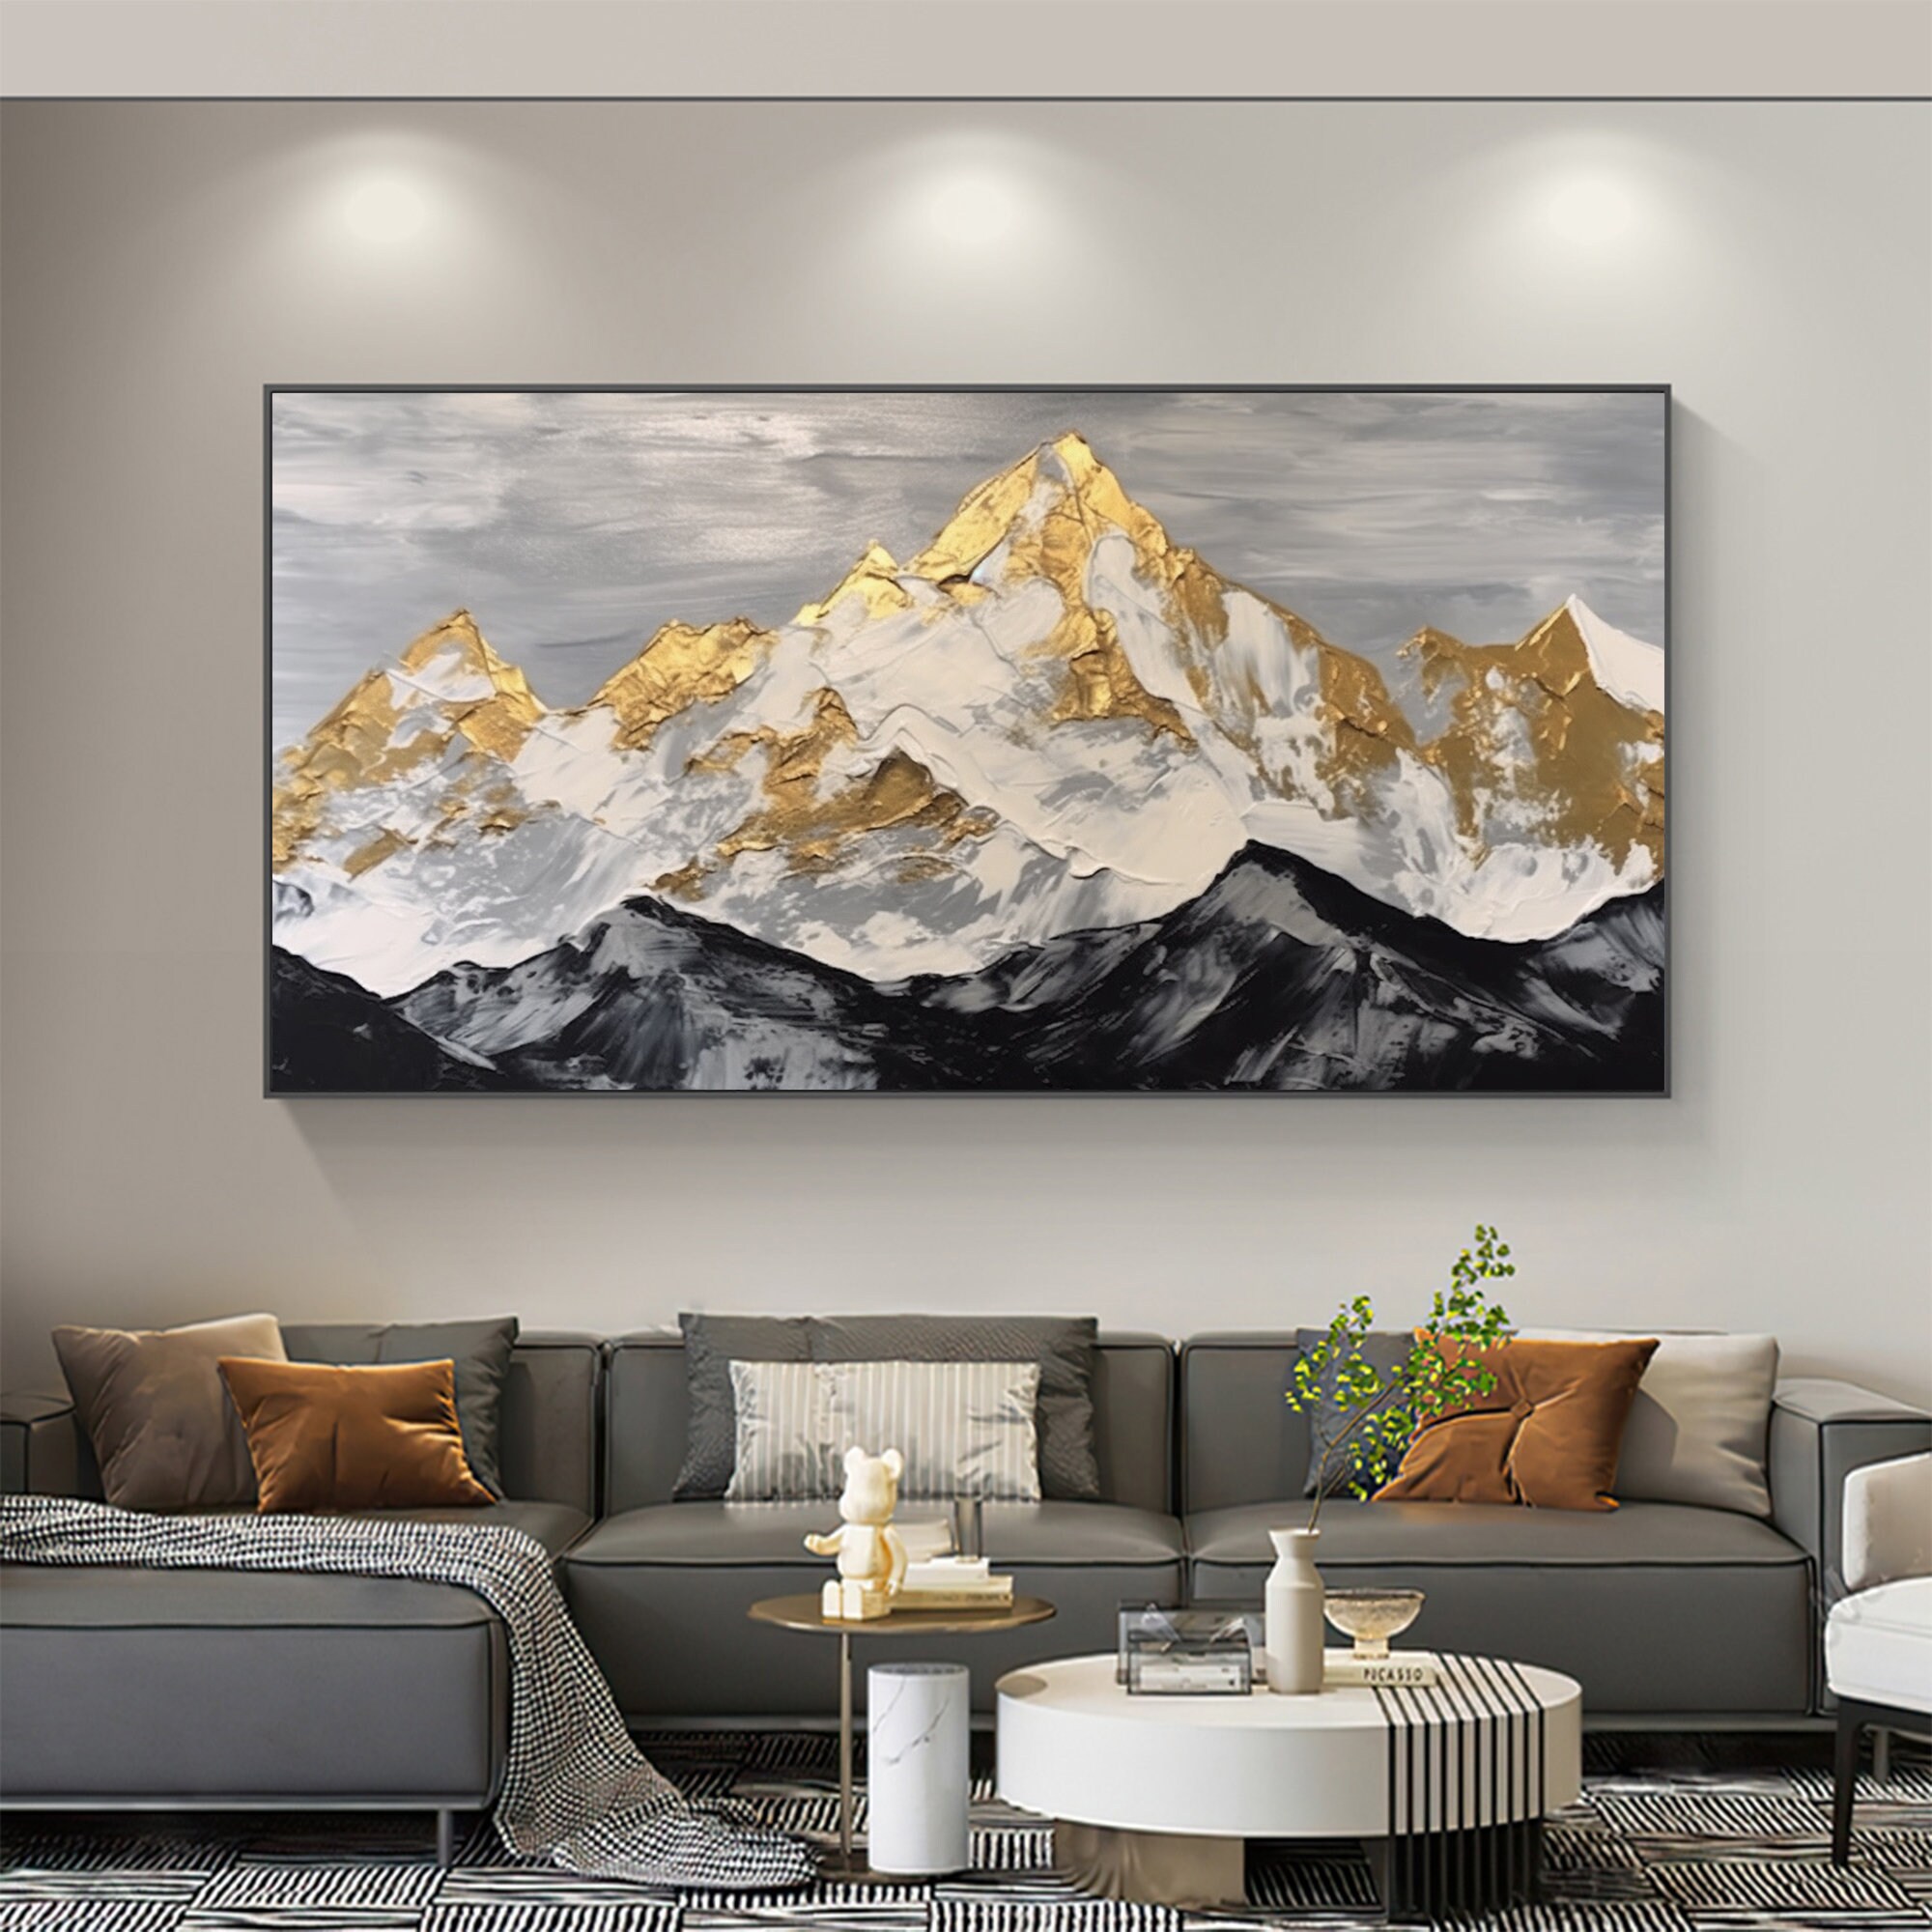 100% Handmade Orange Canvas Paint Gold Foil Landscape Art Oil Paintings  Wall Pictures Trim Back Artwork For Living Room Decor - Painting &  Calligraphy - AliExpress